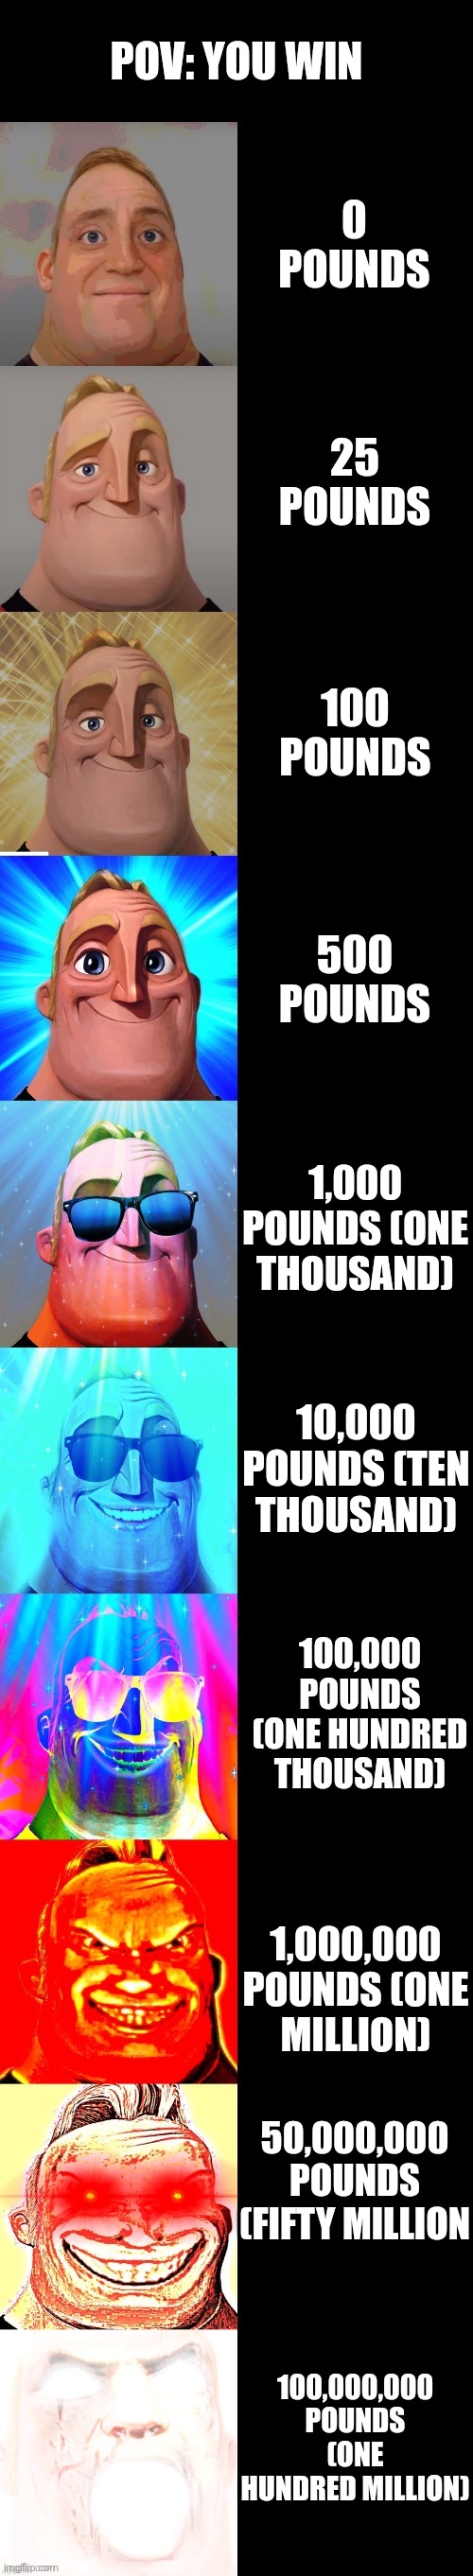 mr incredible becoming canny | POV: YOU WIN; 0 POUNDS; 25 POUNDS; 100 POUNDS; 500 POUNDS; 1,000 POUNDS (ONE THOUSAND); 10,000 POUNDS (TEN THOUSAND); 100,000 POUNDS (ONE HUNDRED THOUSAND); 1,000,000 POUNDS (ONE MILLION); 50,000,000 POUNDS (FIFTY MILLION; 100,000,000 POUNDS (ONE HUNDRED MILLION) | image tagged in mr incredible becoming canny | made w/ Imgflip meme maker